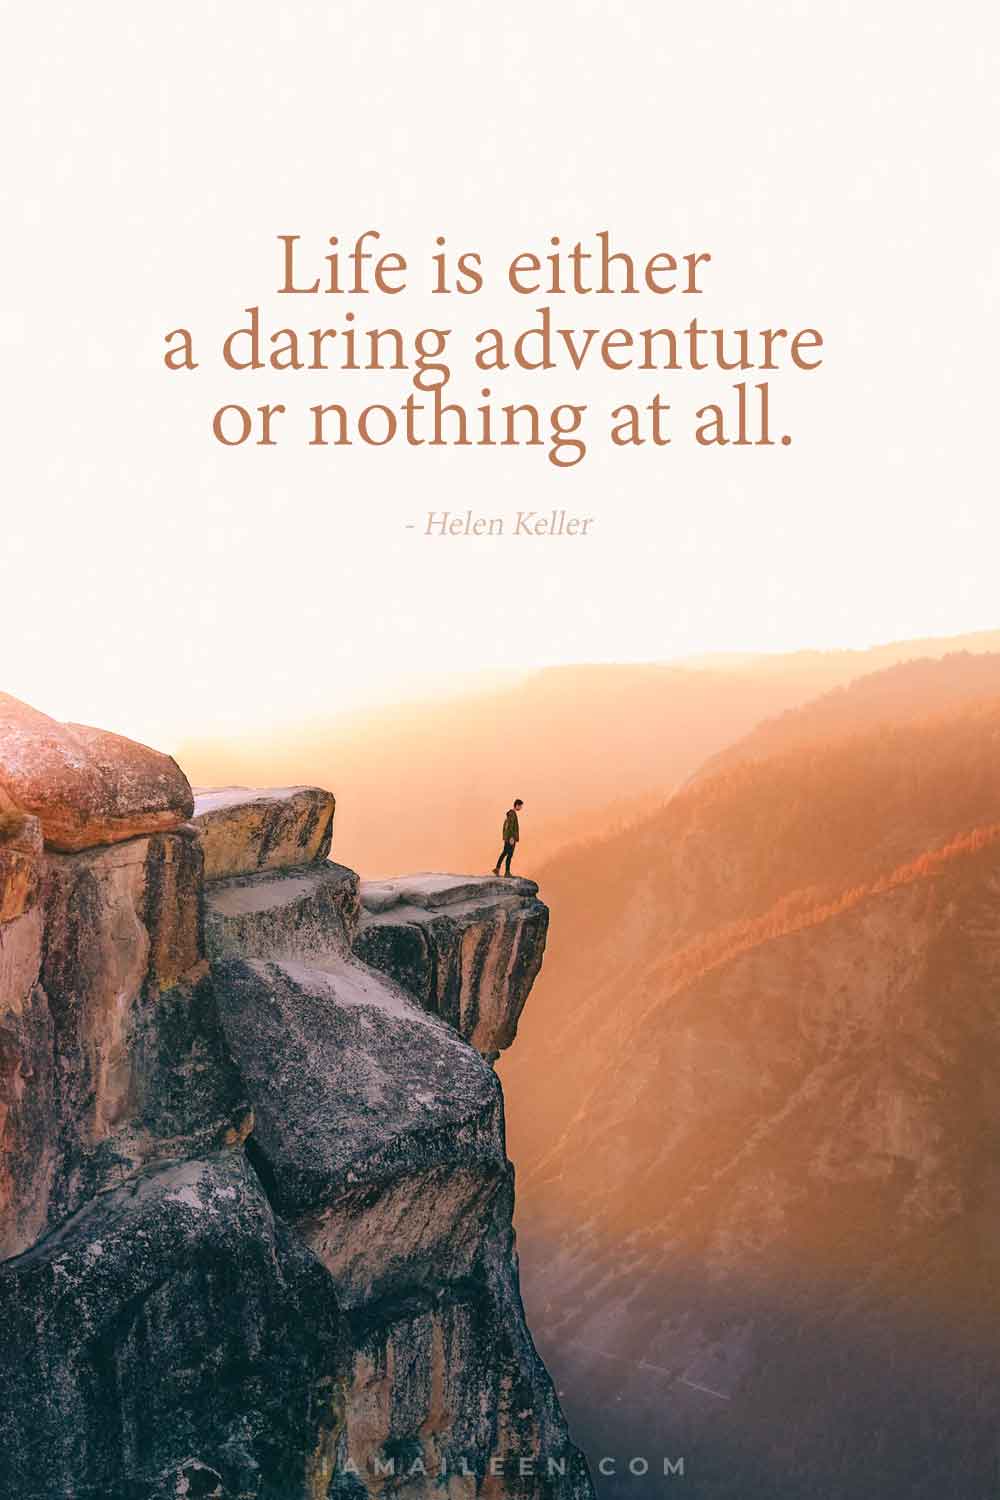 Daring Adventure or Nothing at All Saying